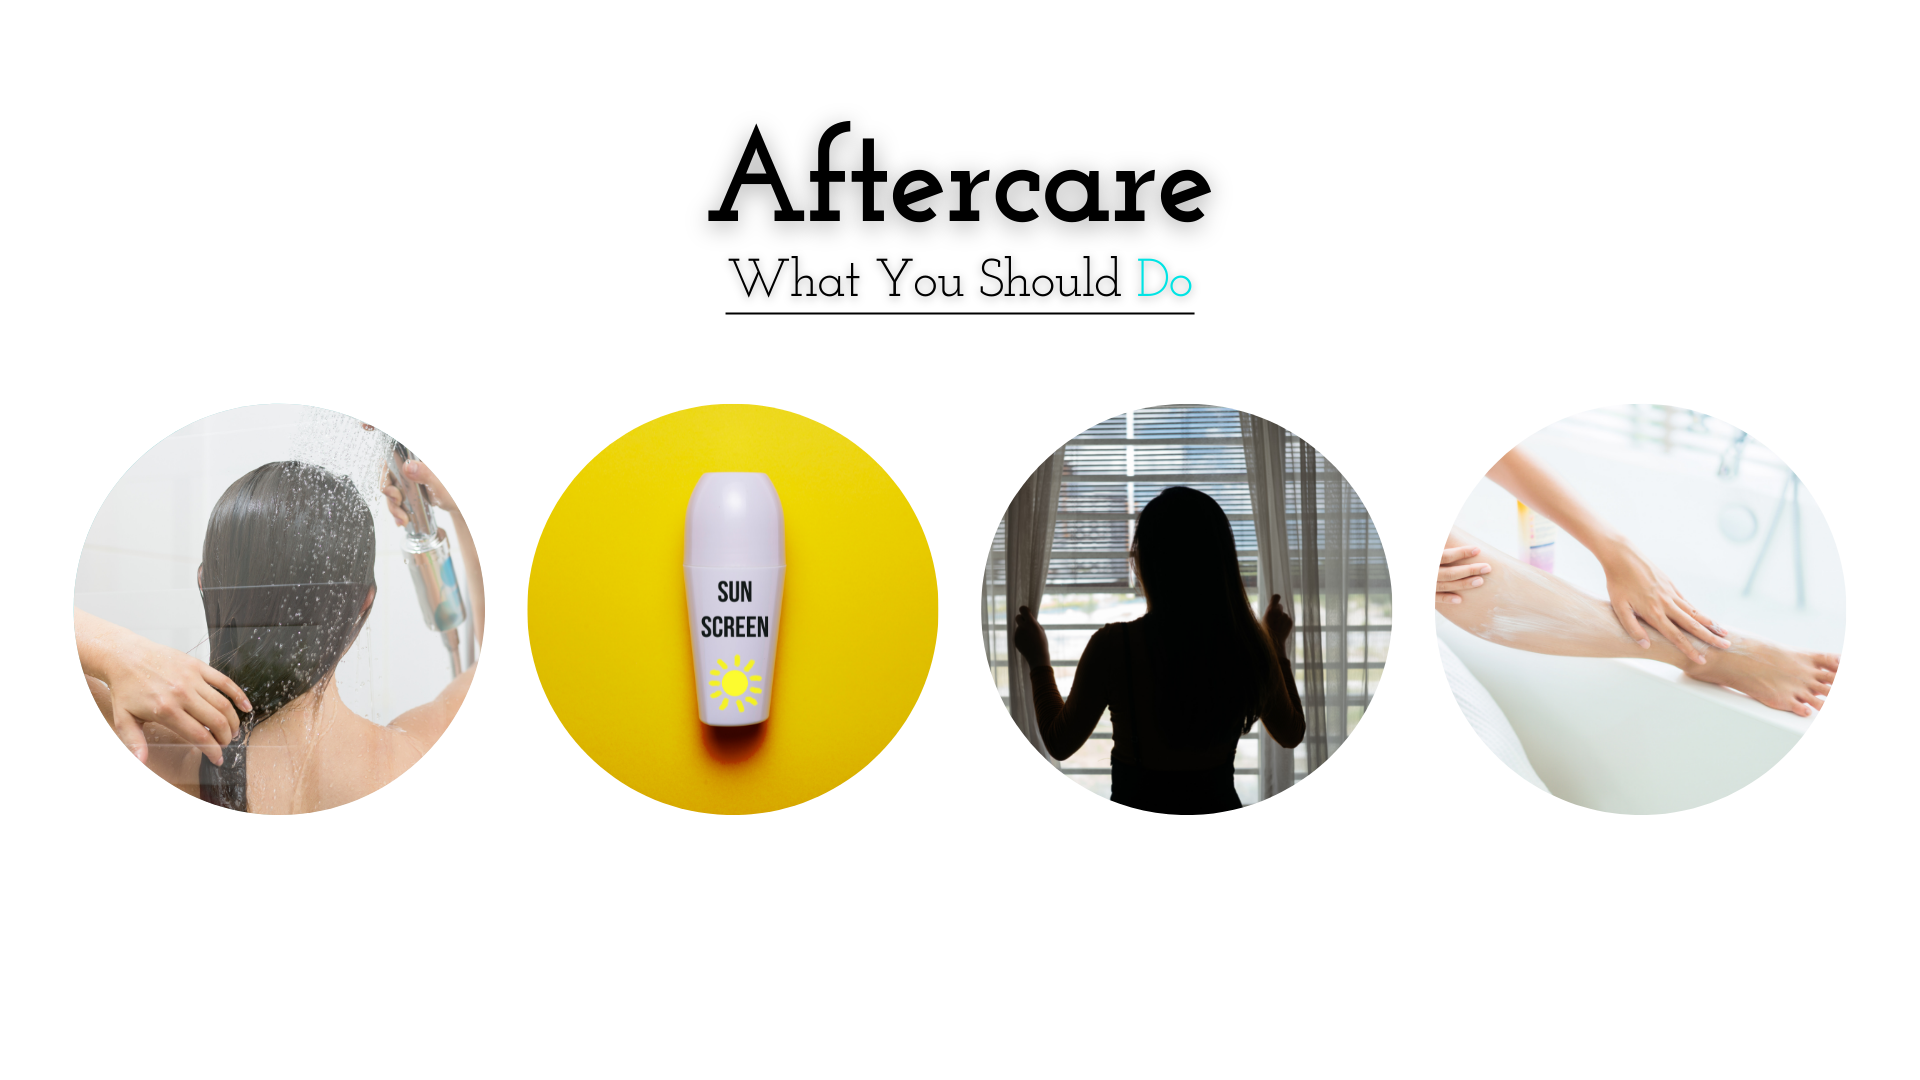 Aftercare: What You Should Do